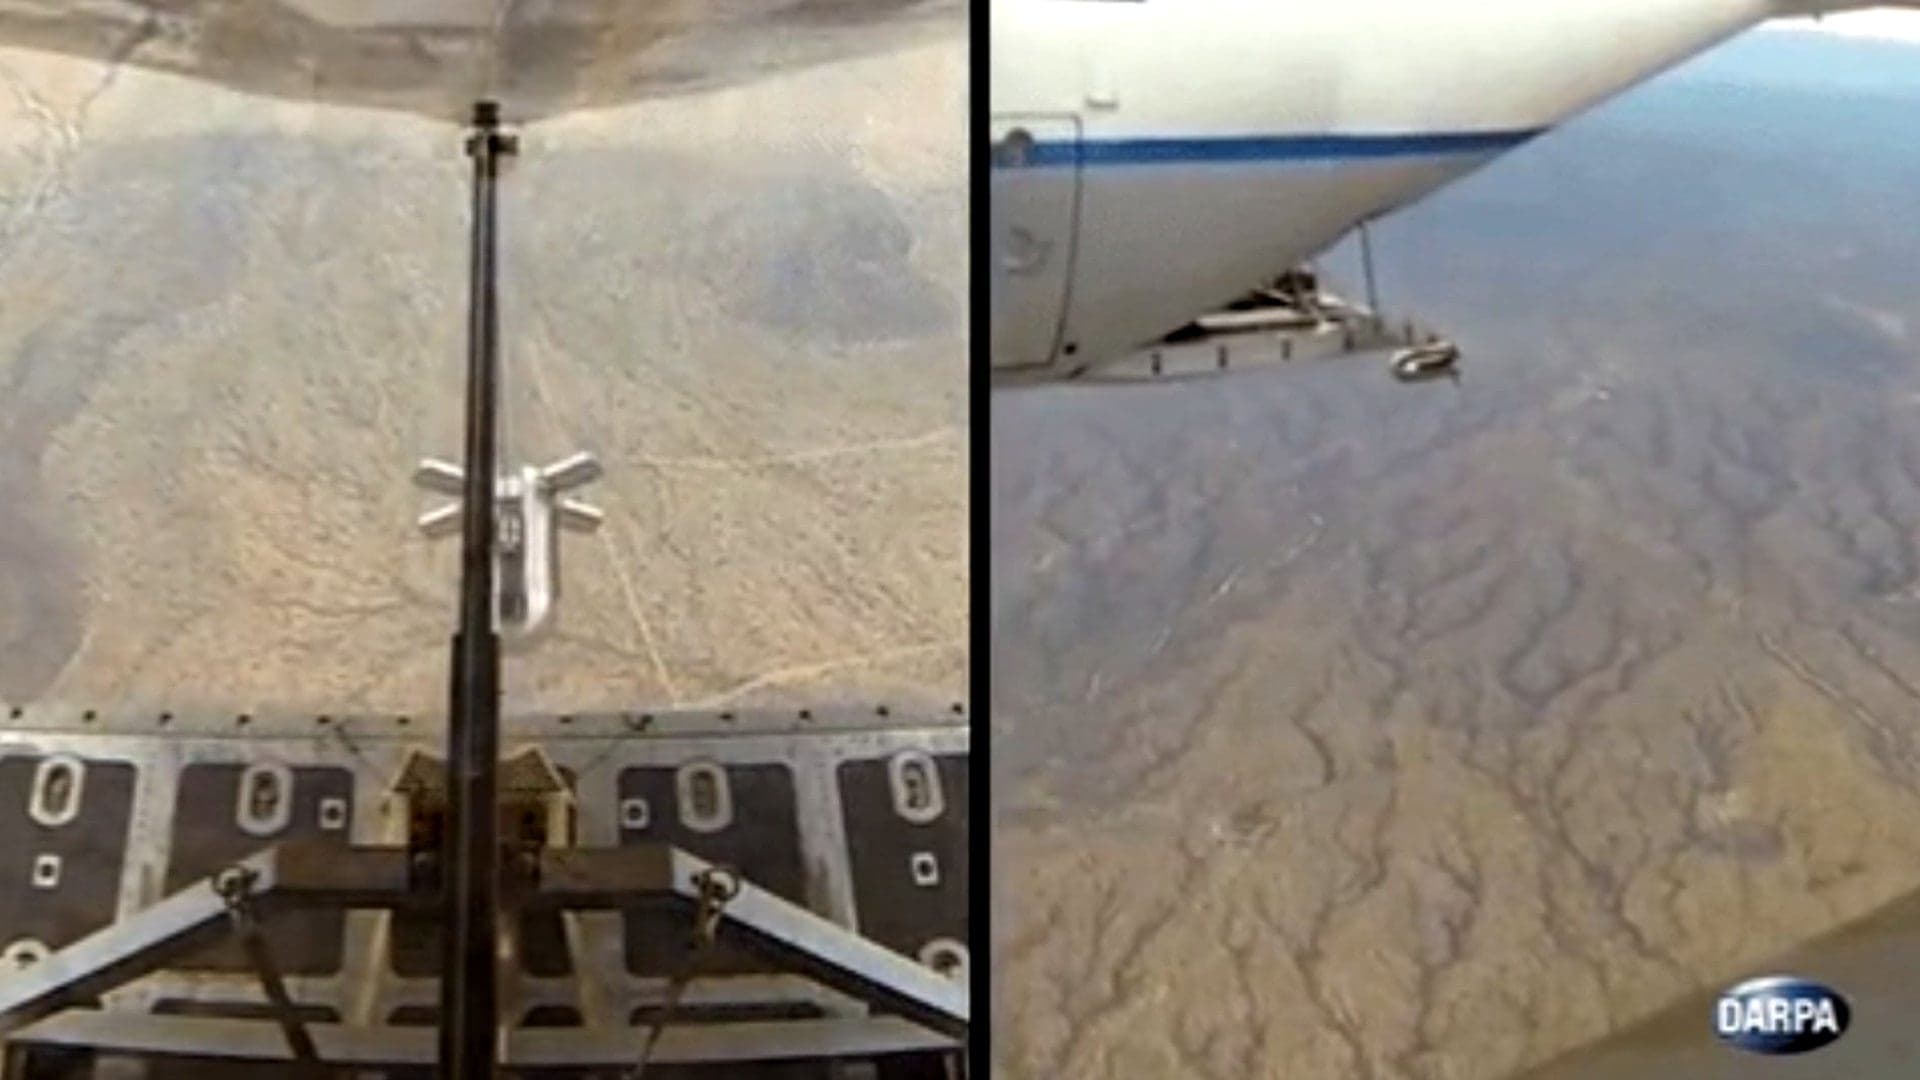 This Is Our First Glimpse of a DARPA Gremlins Drone Being Launched or Recovered From A C-130